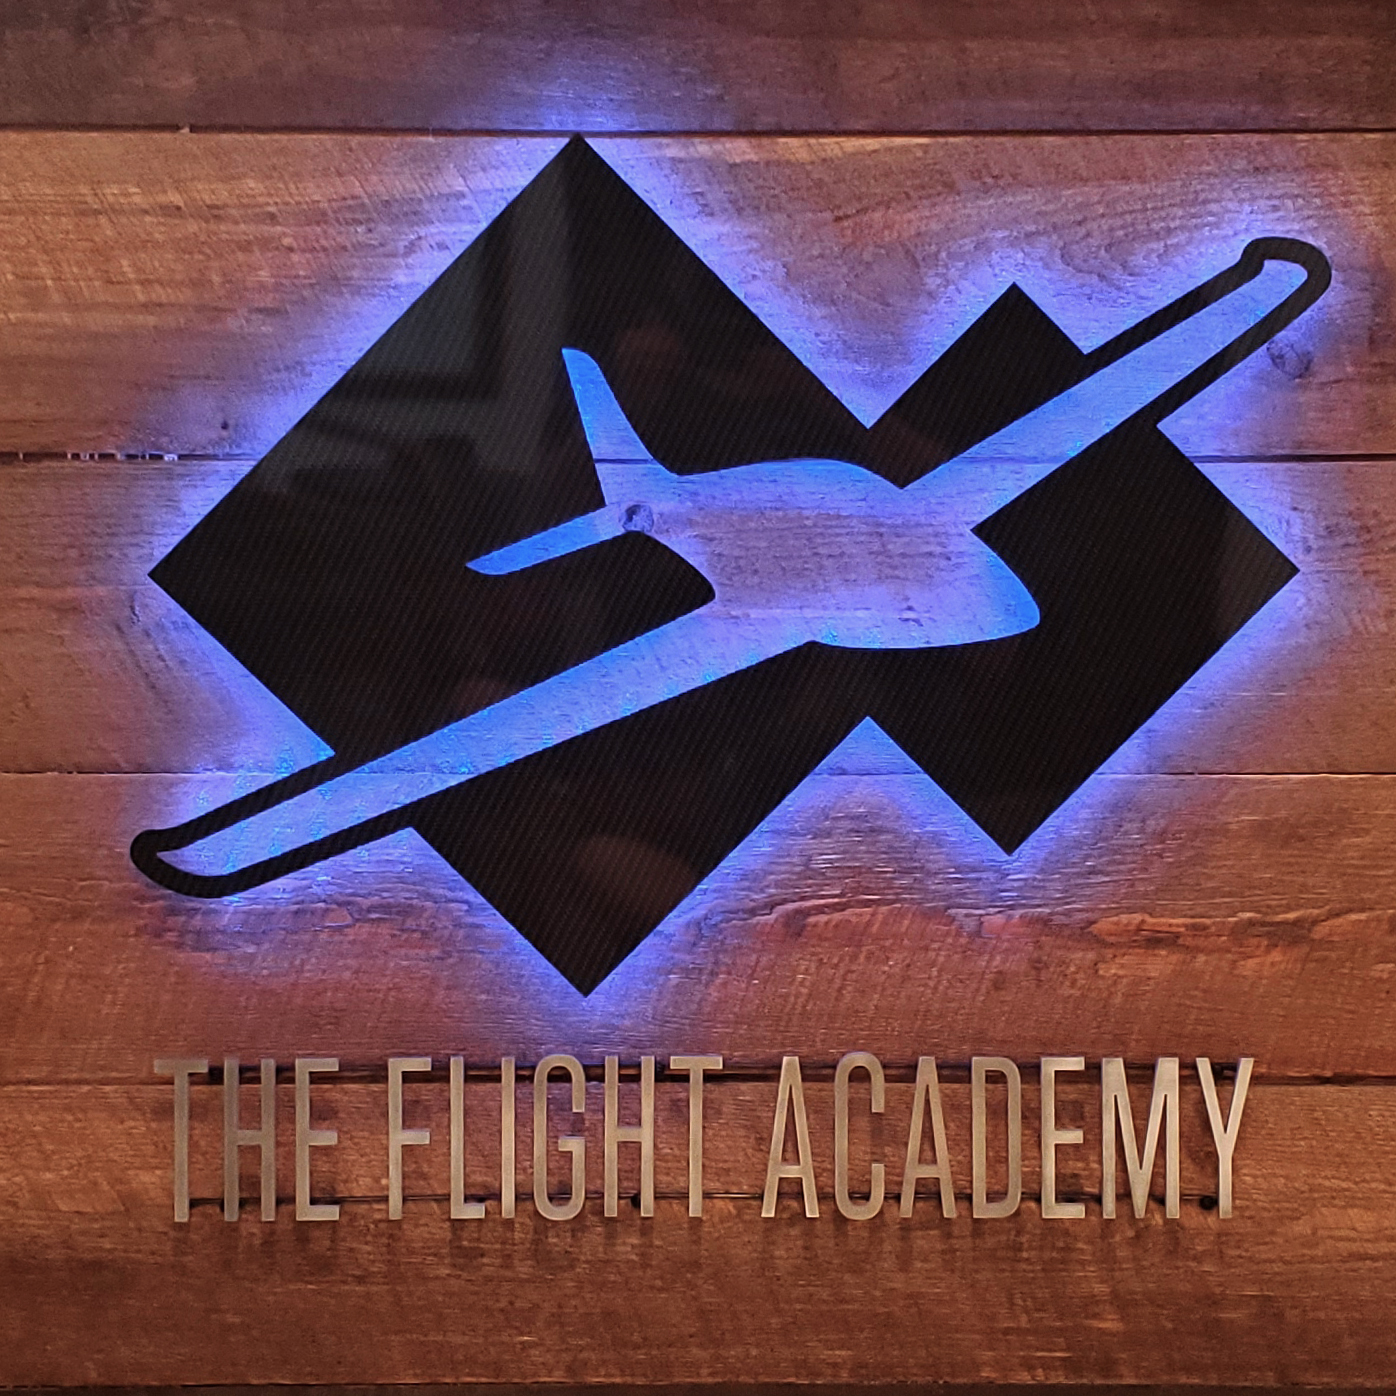 Signage for The Flight Academy, featuring their airplane logo against a wood panel, backlit in blue LED, with the name in aluminum lettering underneath.